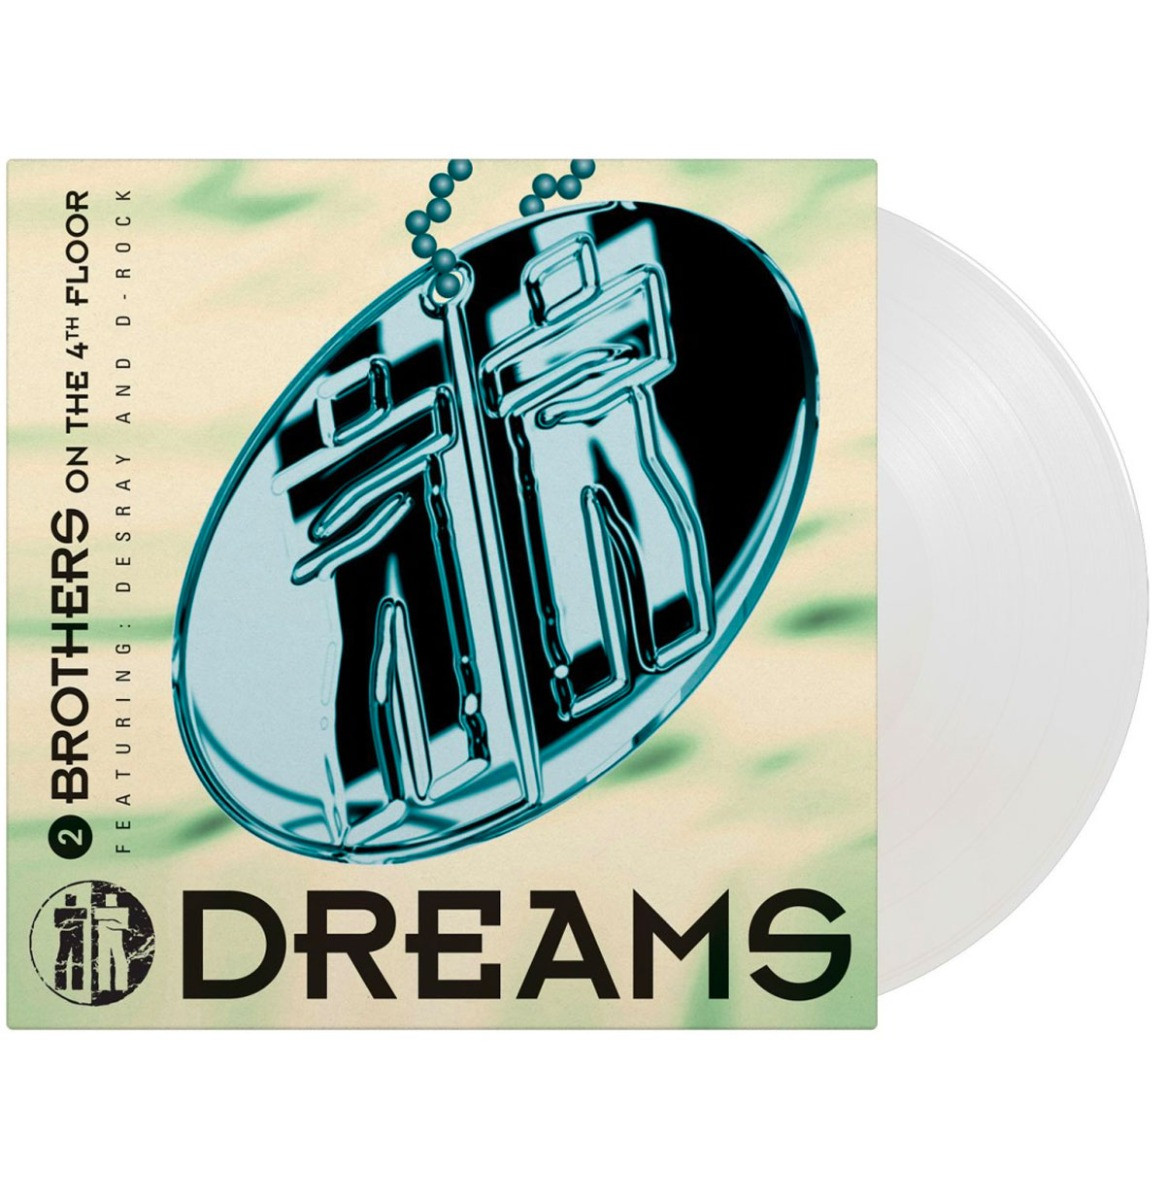 2 Brothers On The 4th Floor - Dream - 2LP Coloured Vinyl